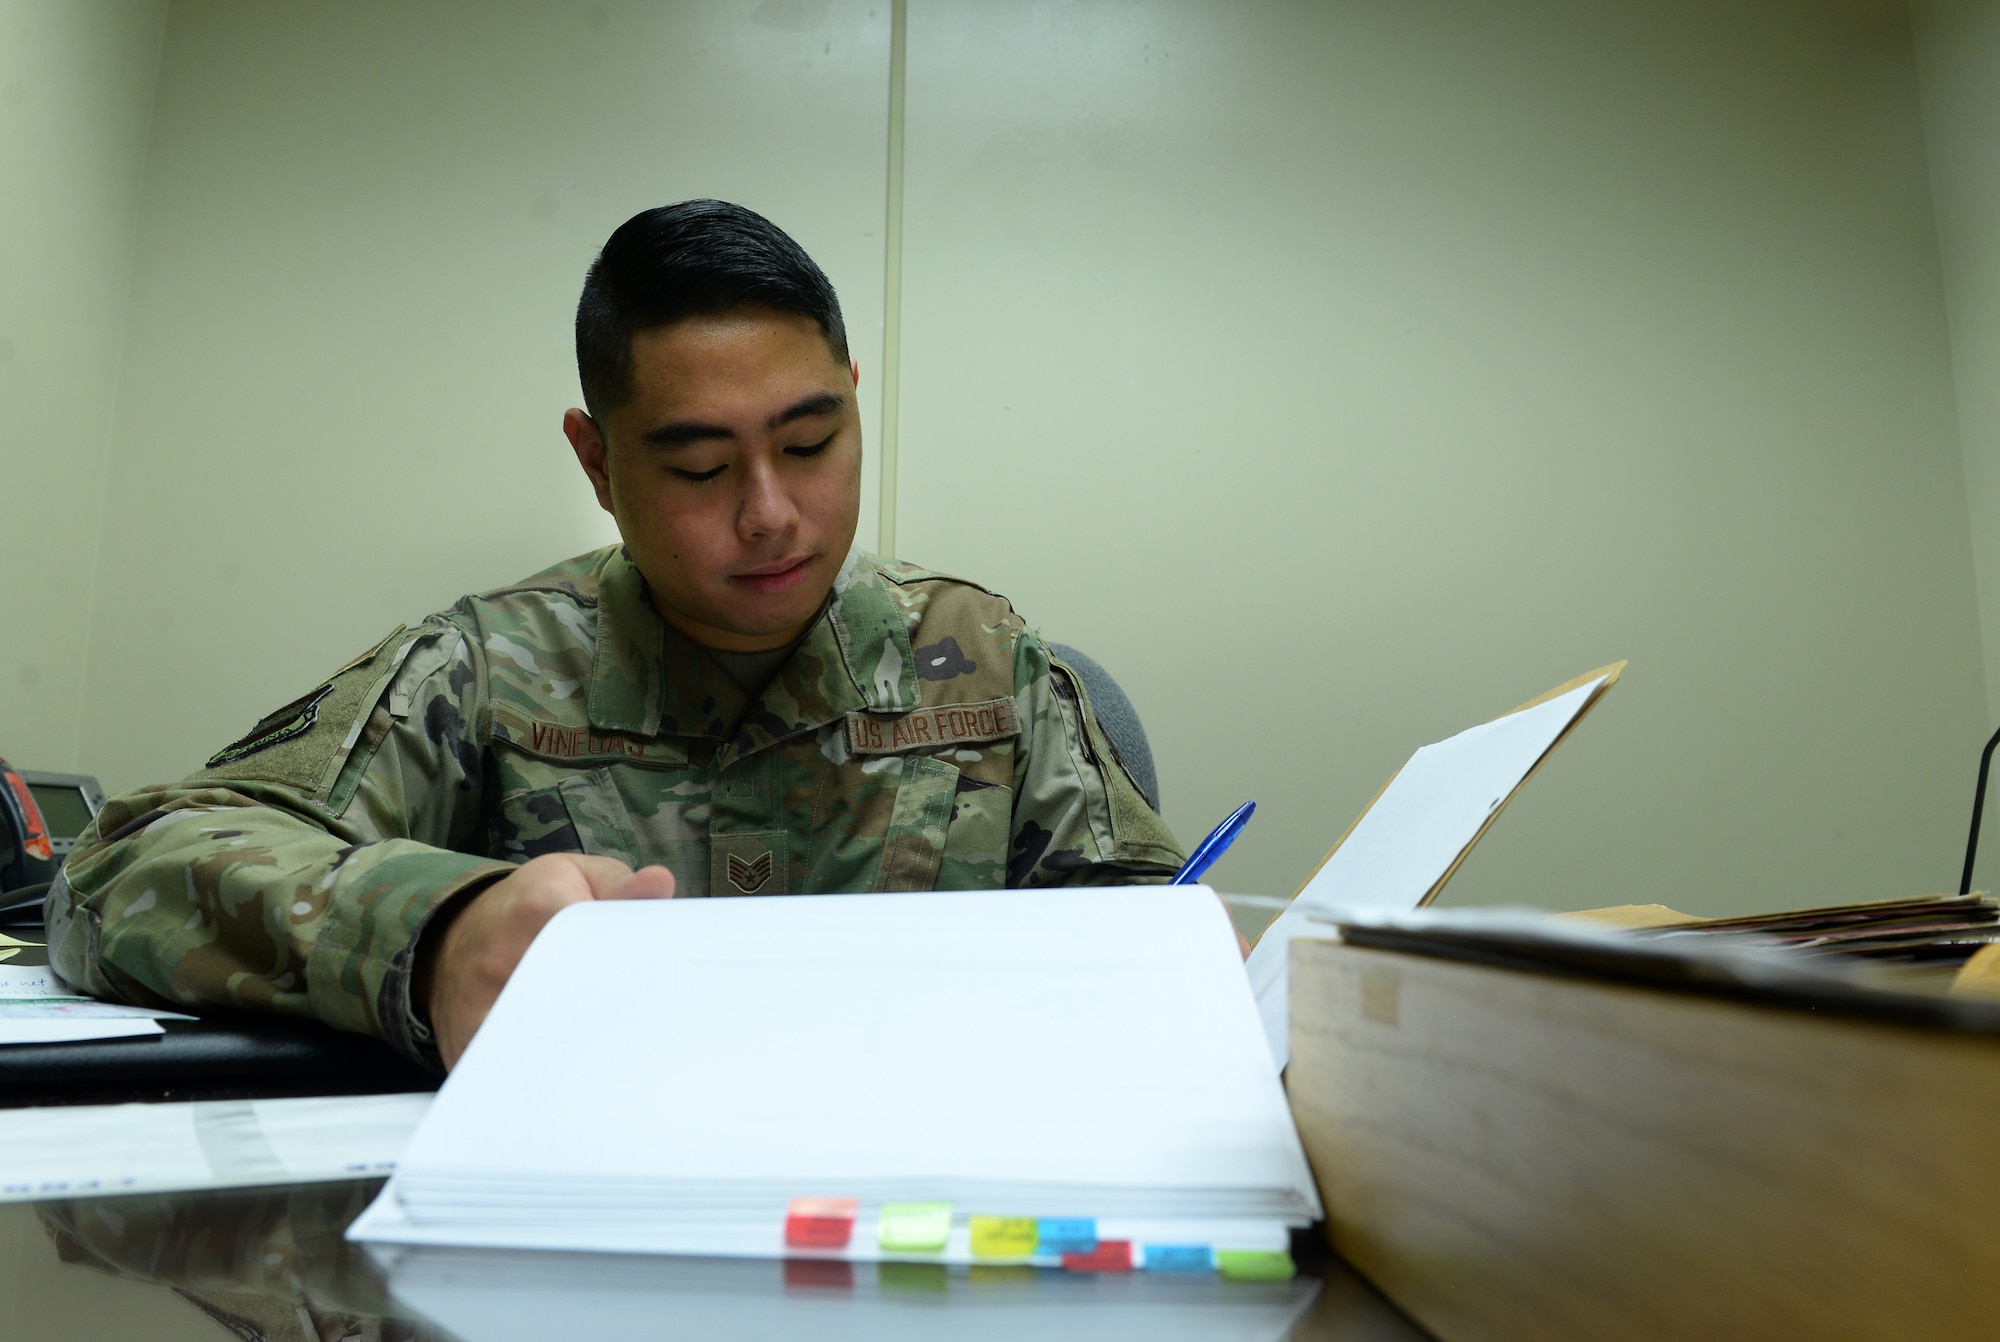 Airman sits at desk looking a file.